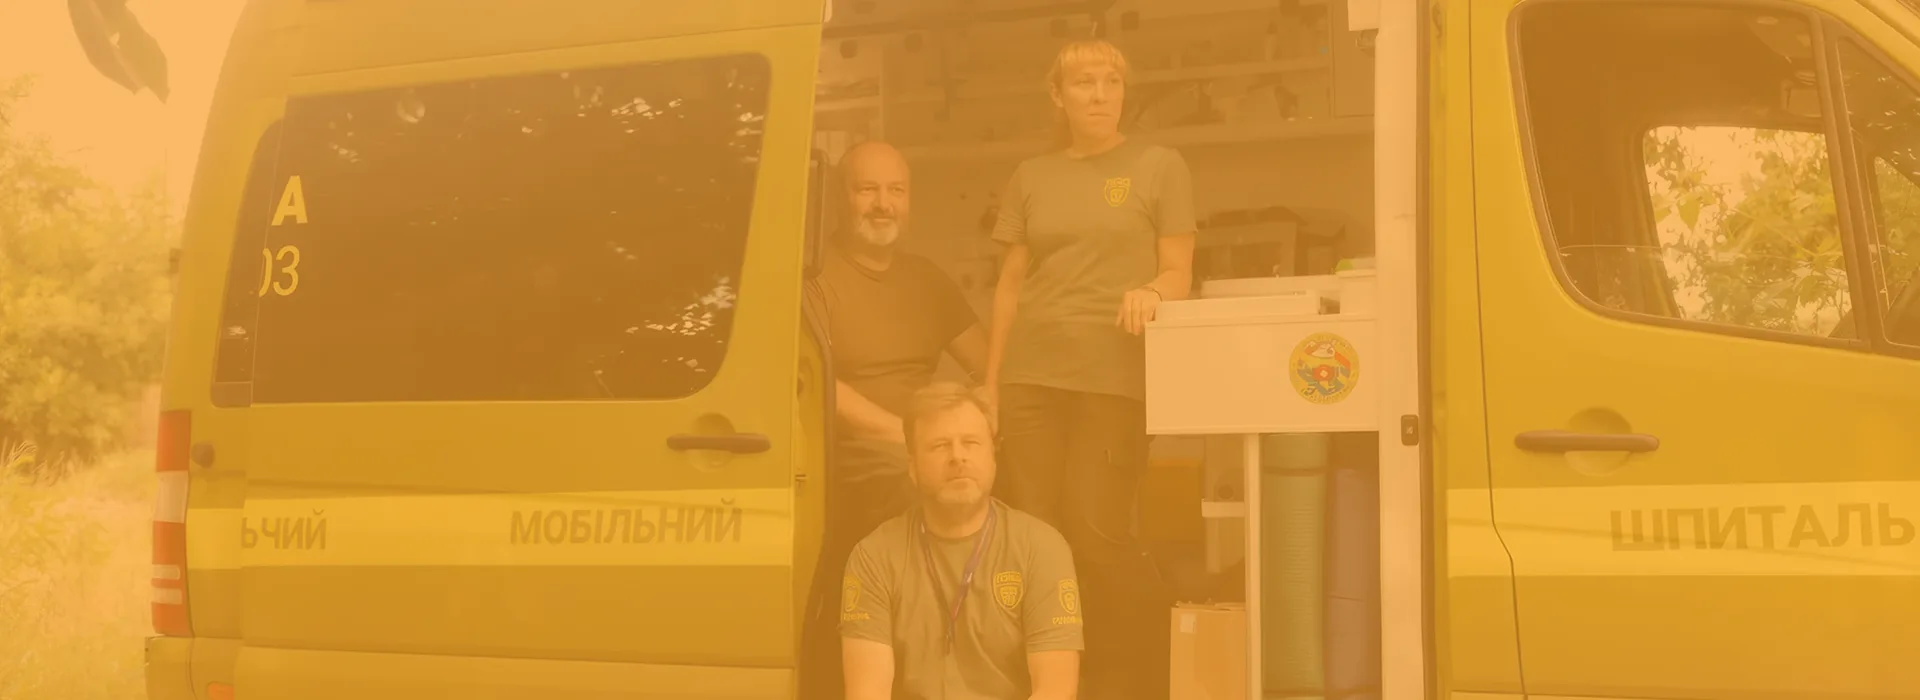 humanity for ukraine medical transports and facilities